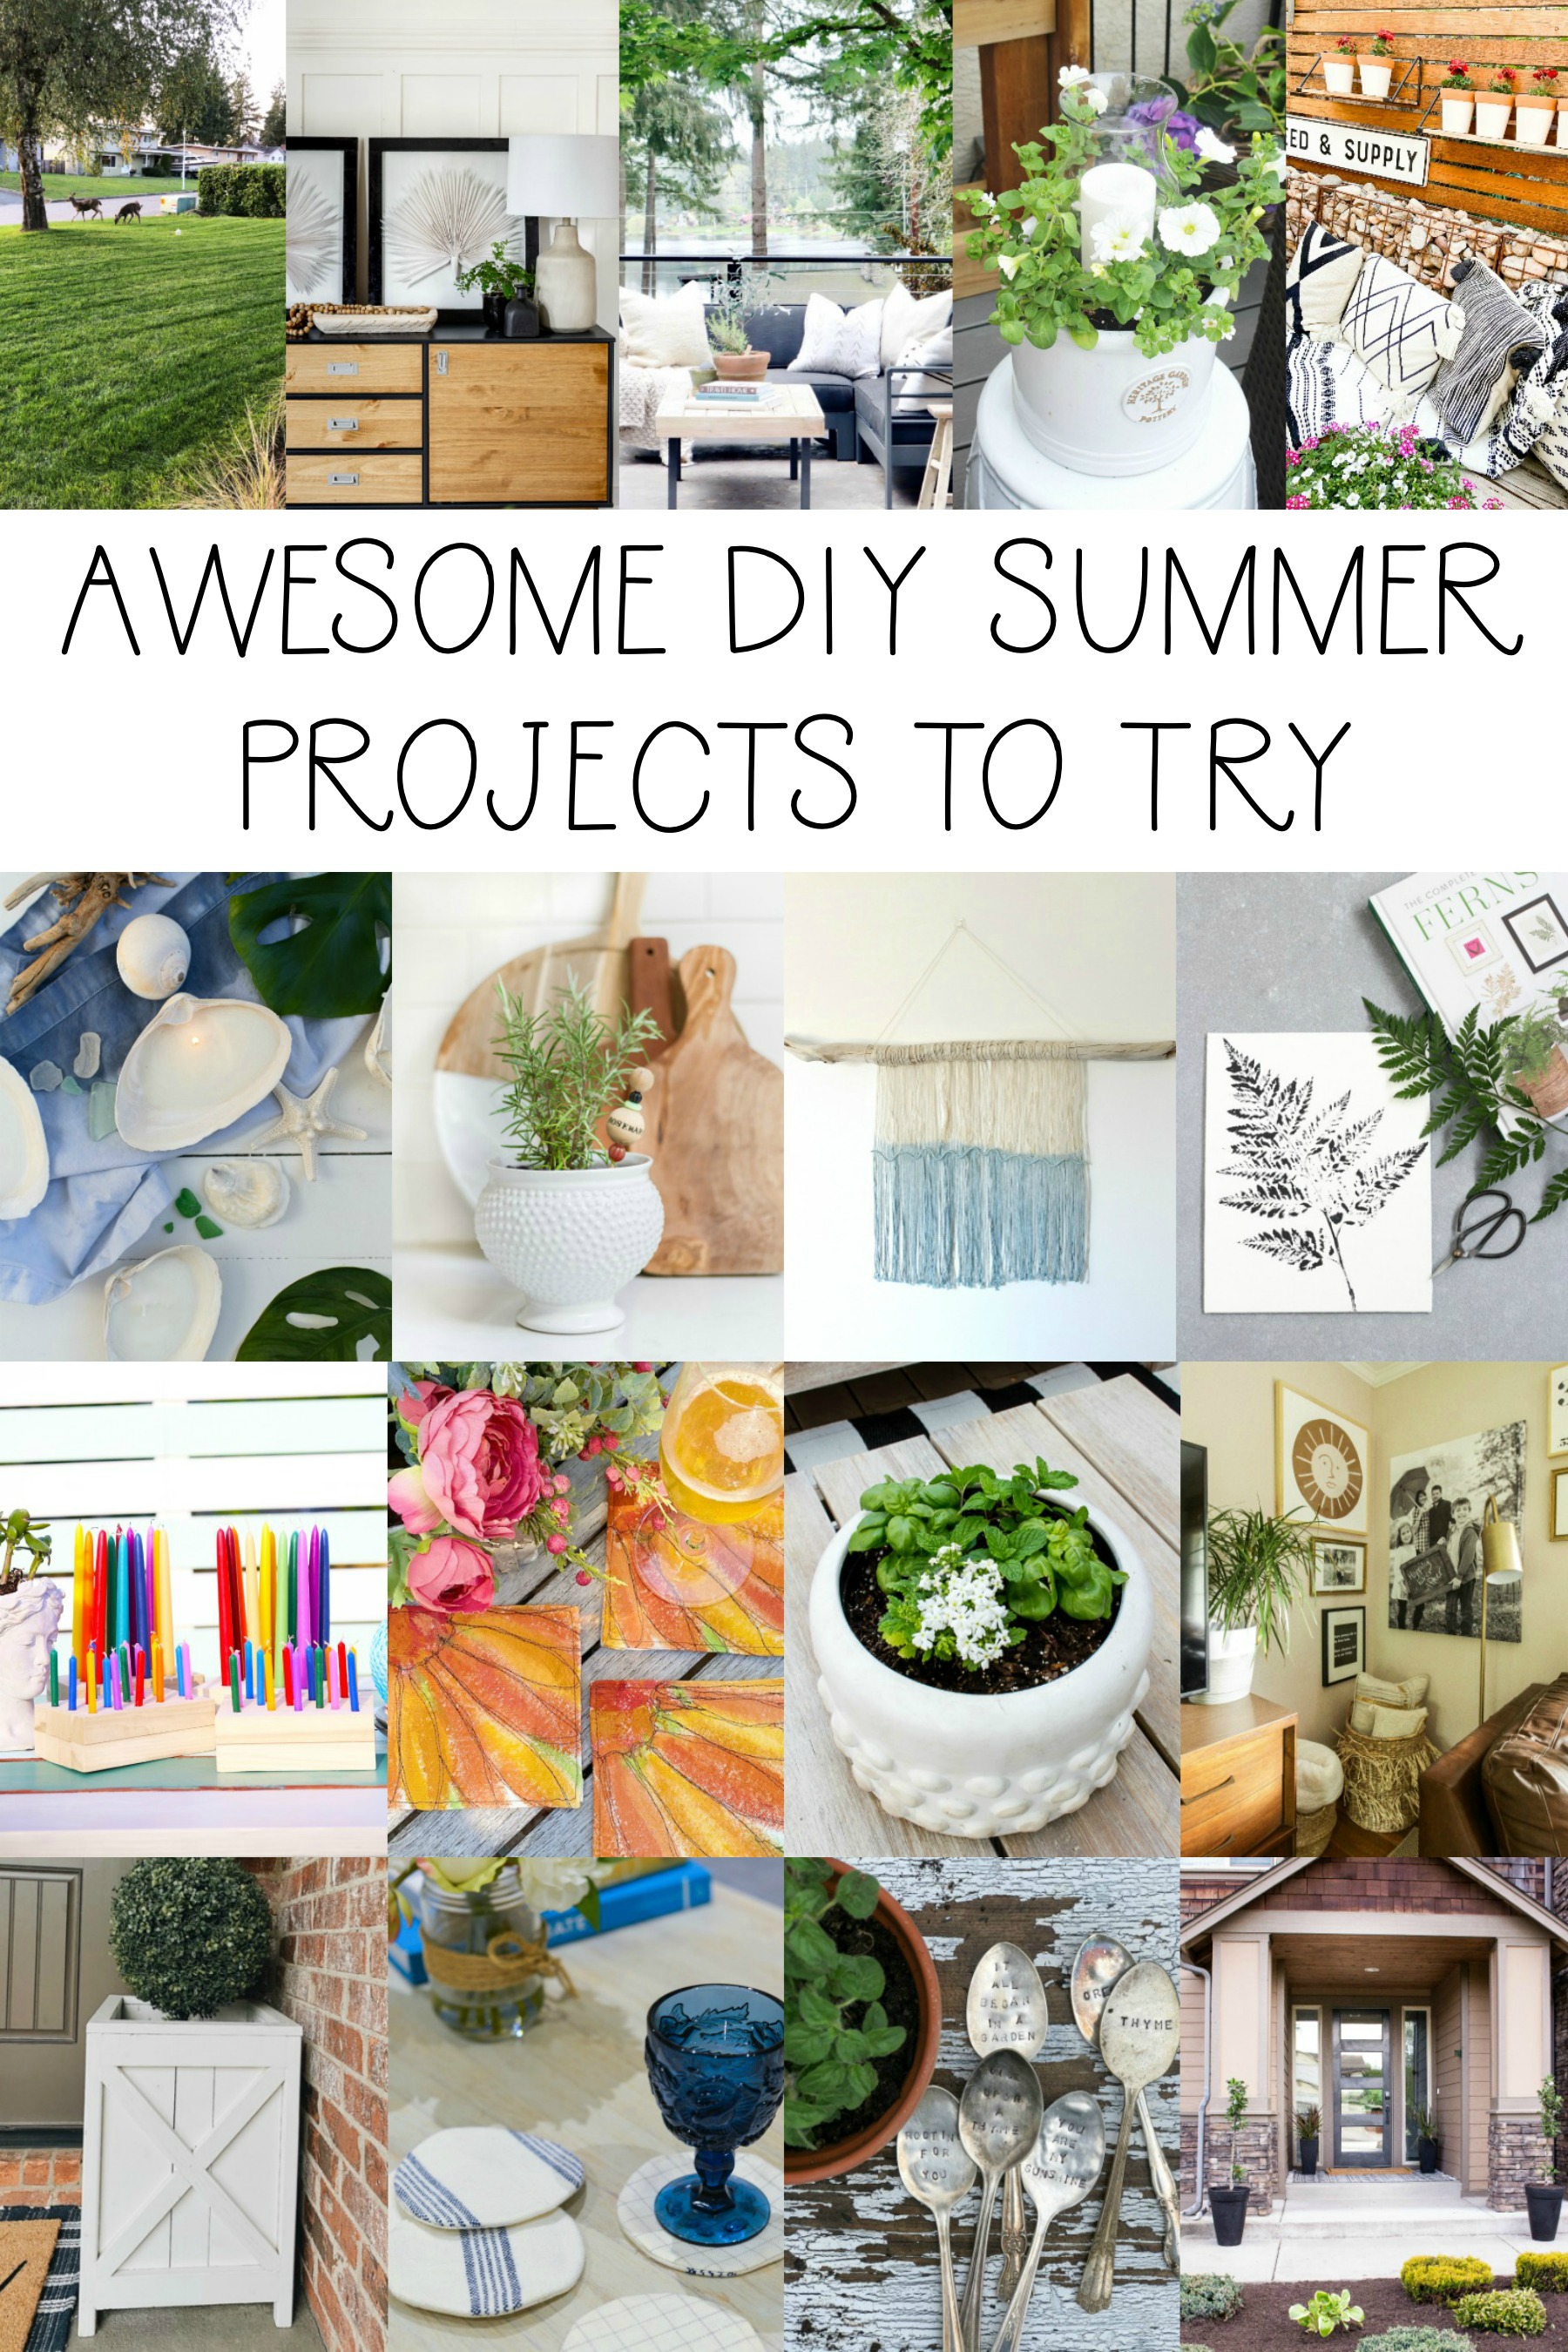 Awesome DIY Summer Projects To Try poster.